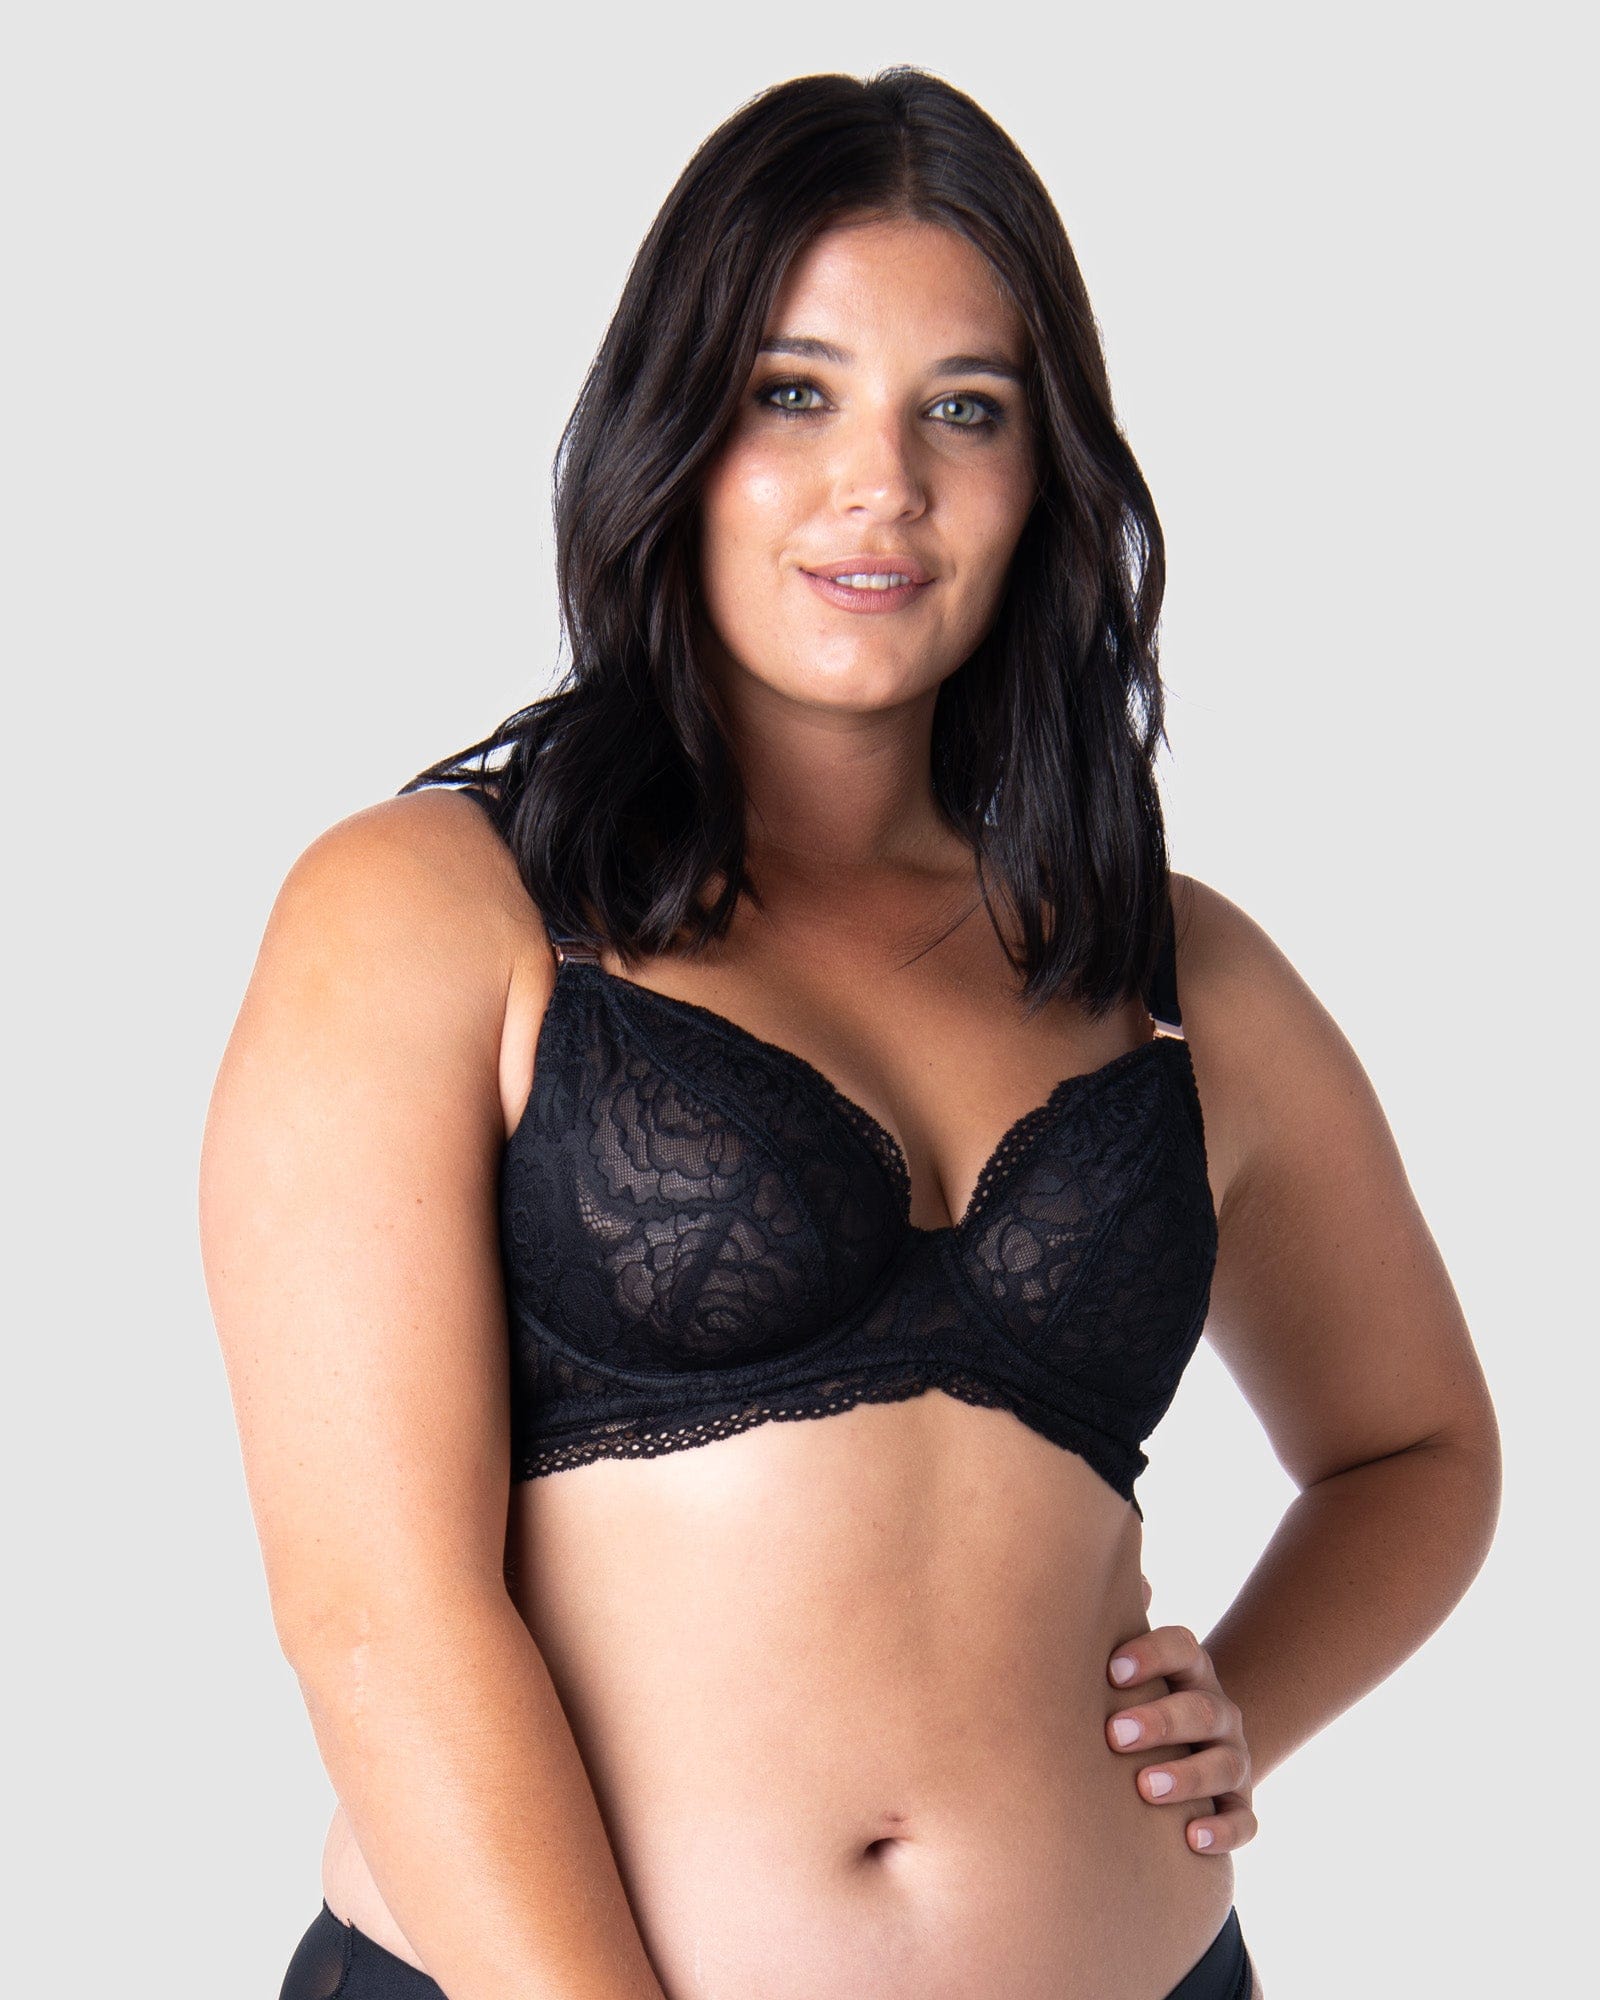 Plus Size Black Lace Bralette With Mesh Insert, You + All